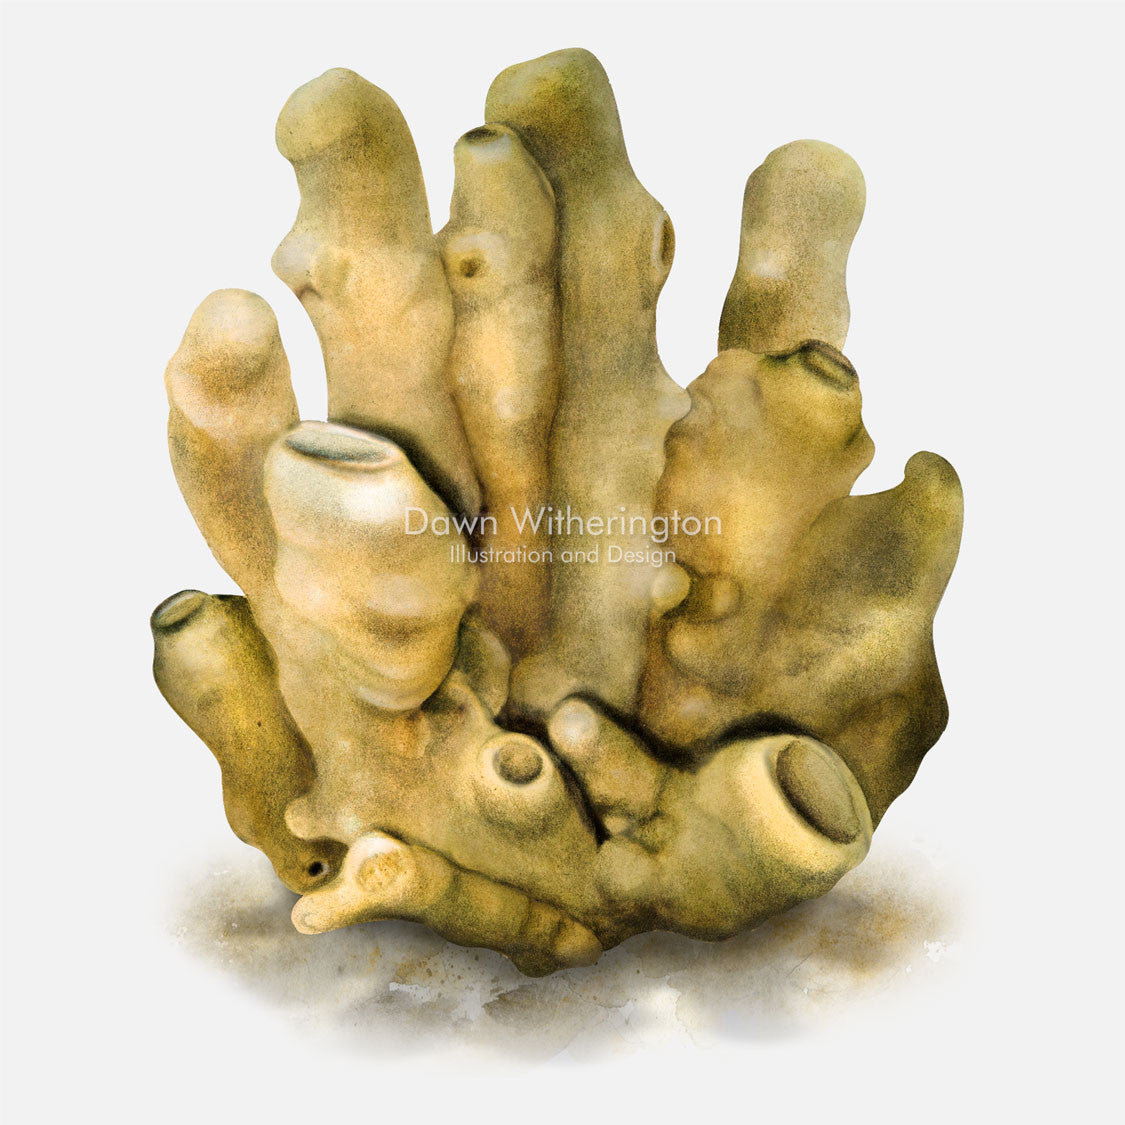 This beautiful illustration of a chimney sponge, Callyspongia fallax, is accurate in detail.